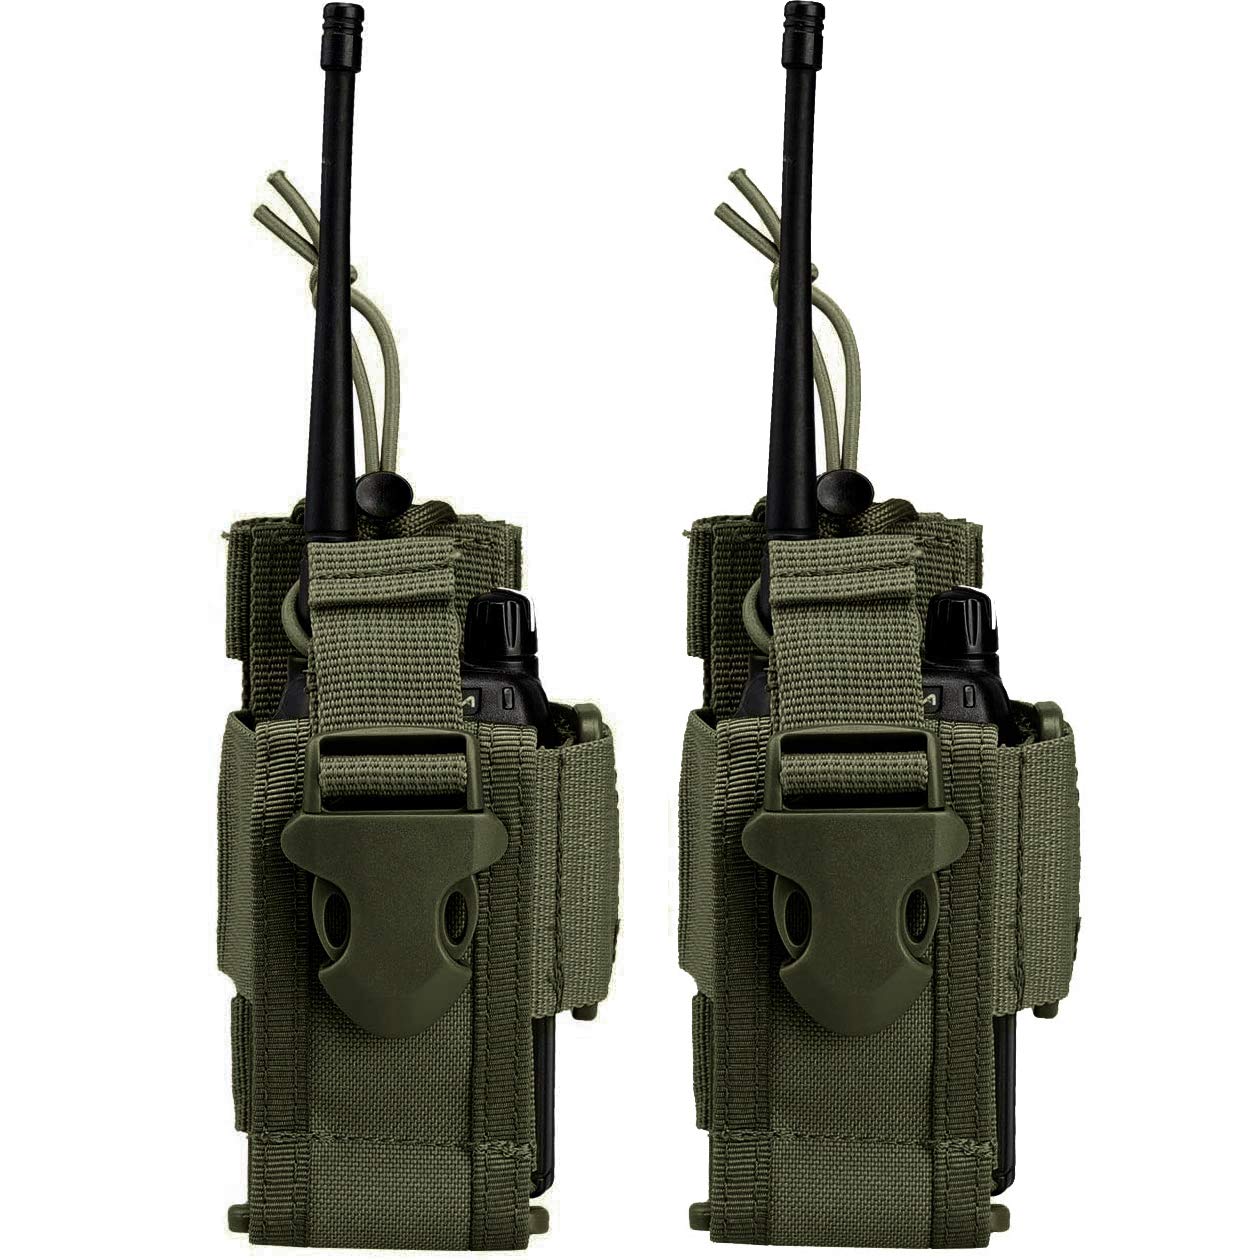  abcGoodefg Adjustable Tactical Radio Holder Bag, Molle Two Way Radio  Holster Pouch Holder, Nylon Duty Military Storage Case Bag for walkie  Talkie (Black, 1 PACK)